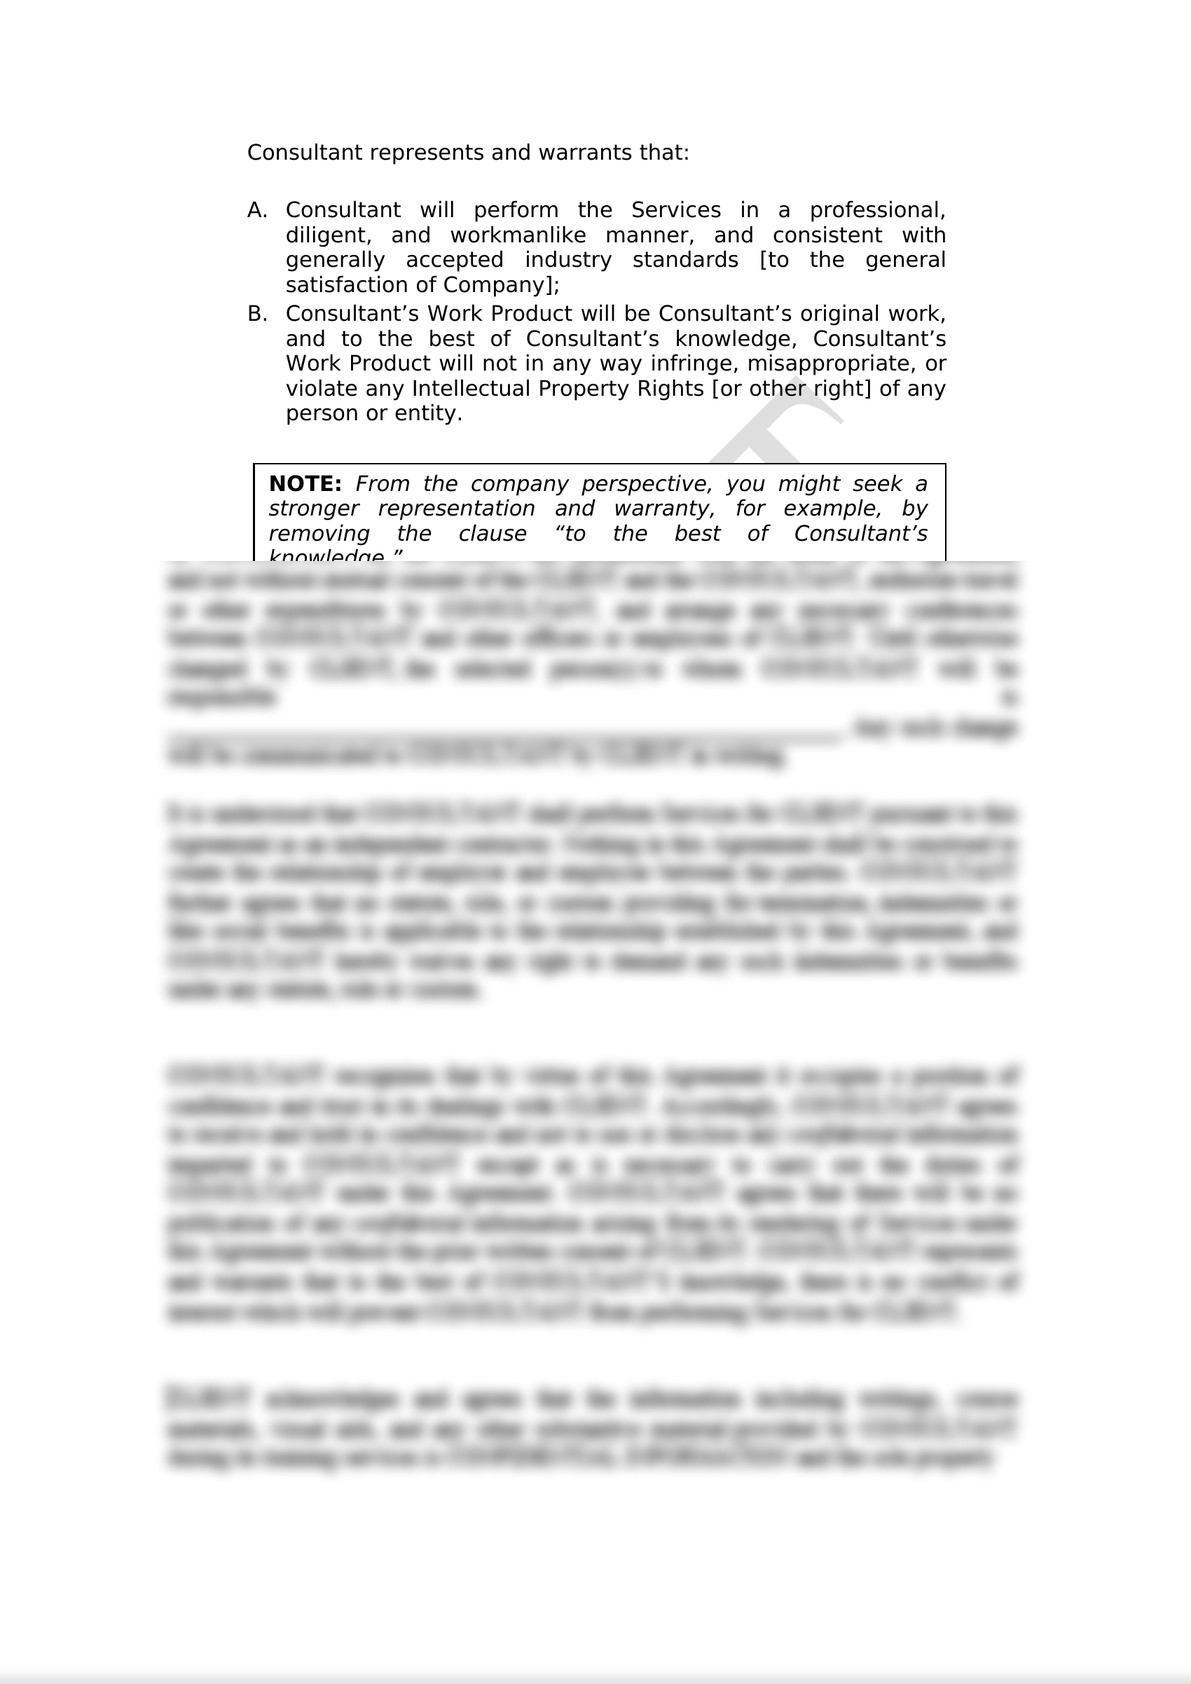 Consulting Agreement (IP Context)-5